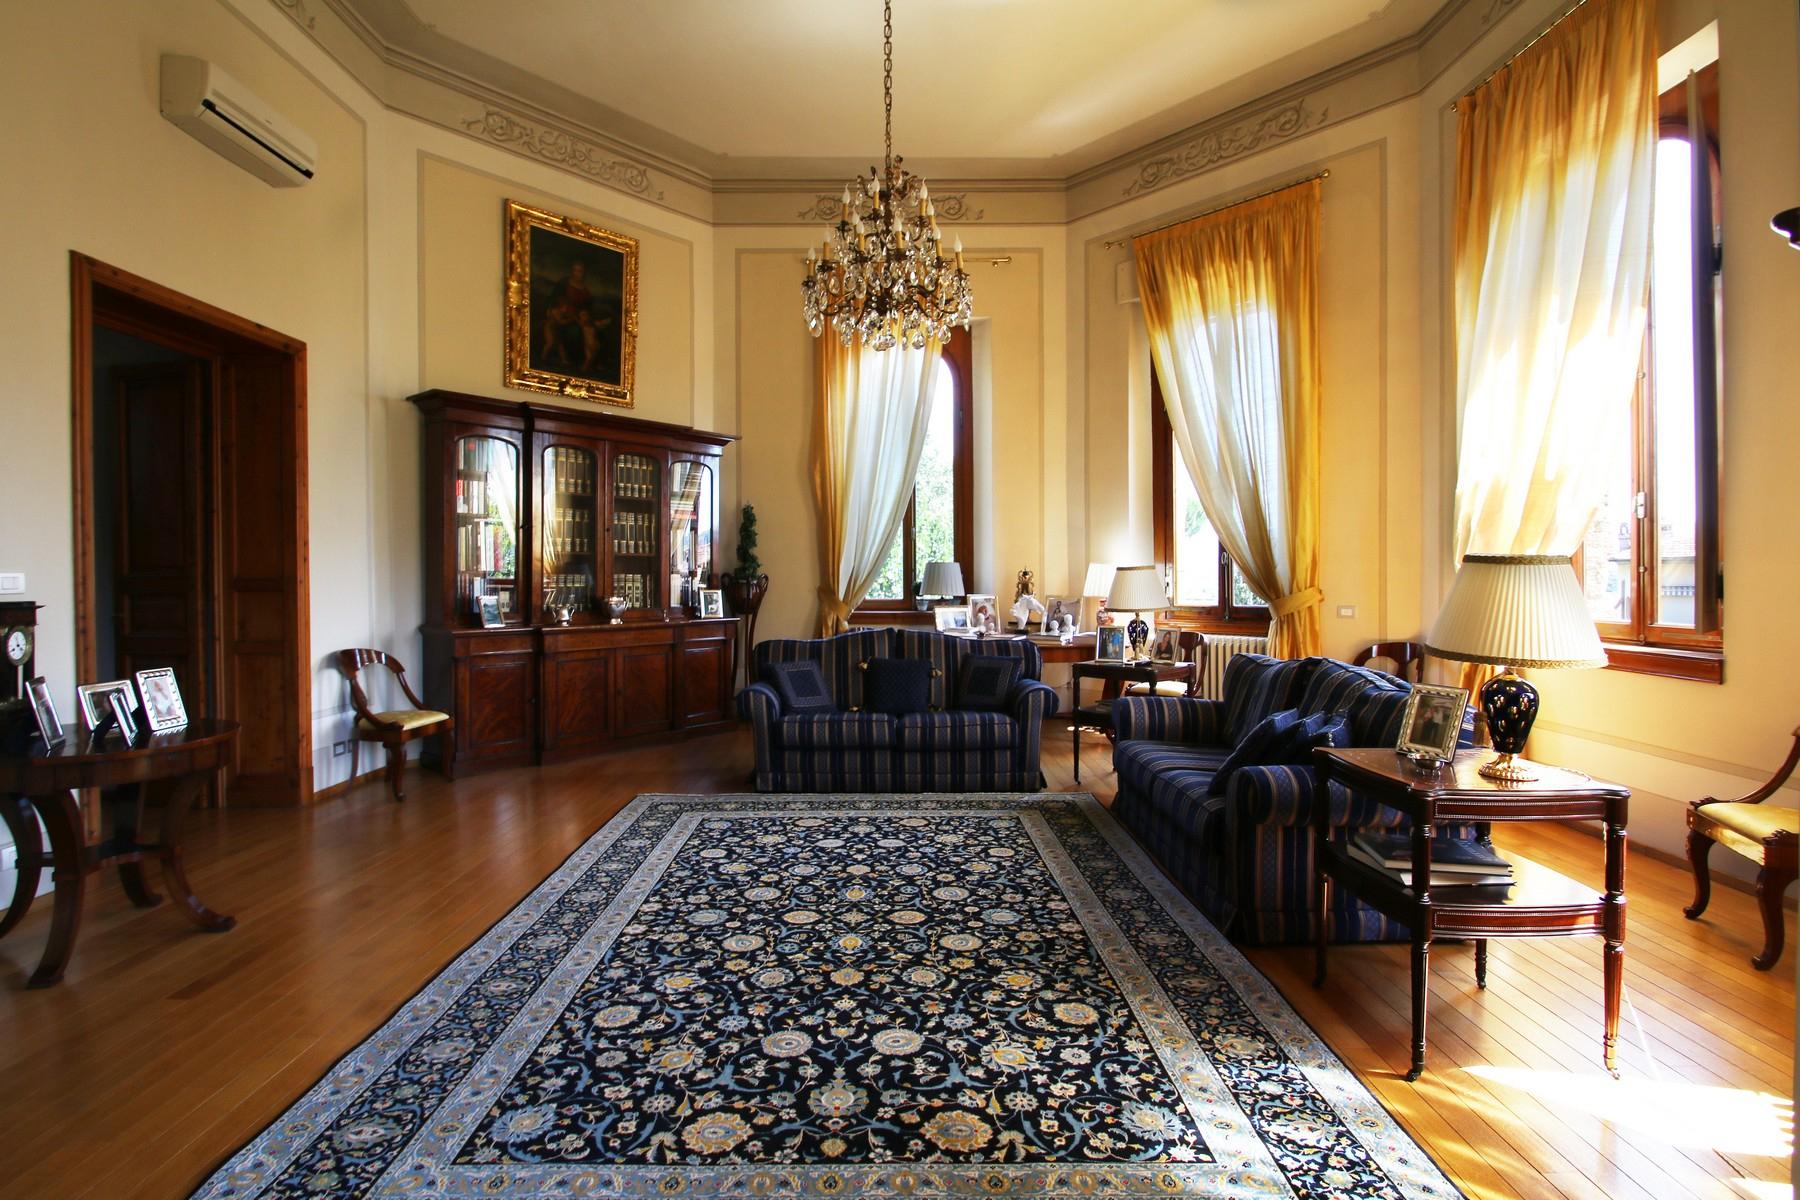 Flamboyant Top-floor Apartment with Tower in Bellosguardo, Florence - 1